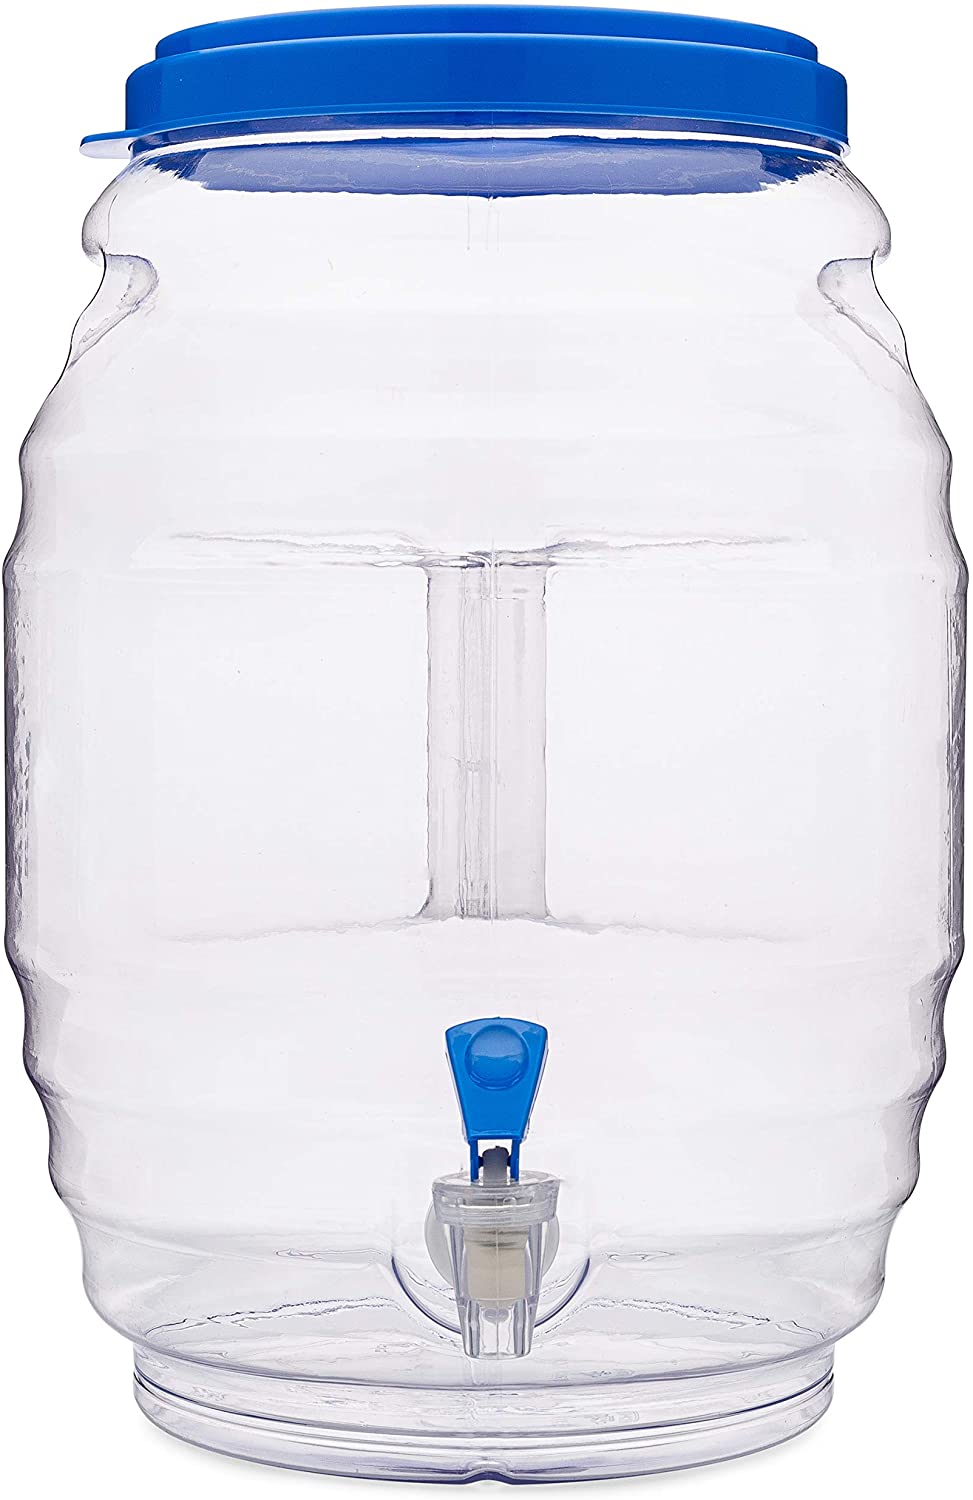 3 GAL Blue Jug Water Container With Lid u0026 Spout – R u0026 B Import